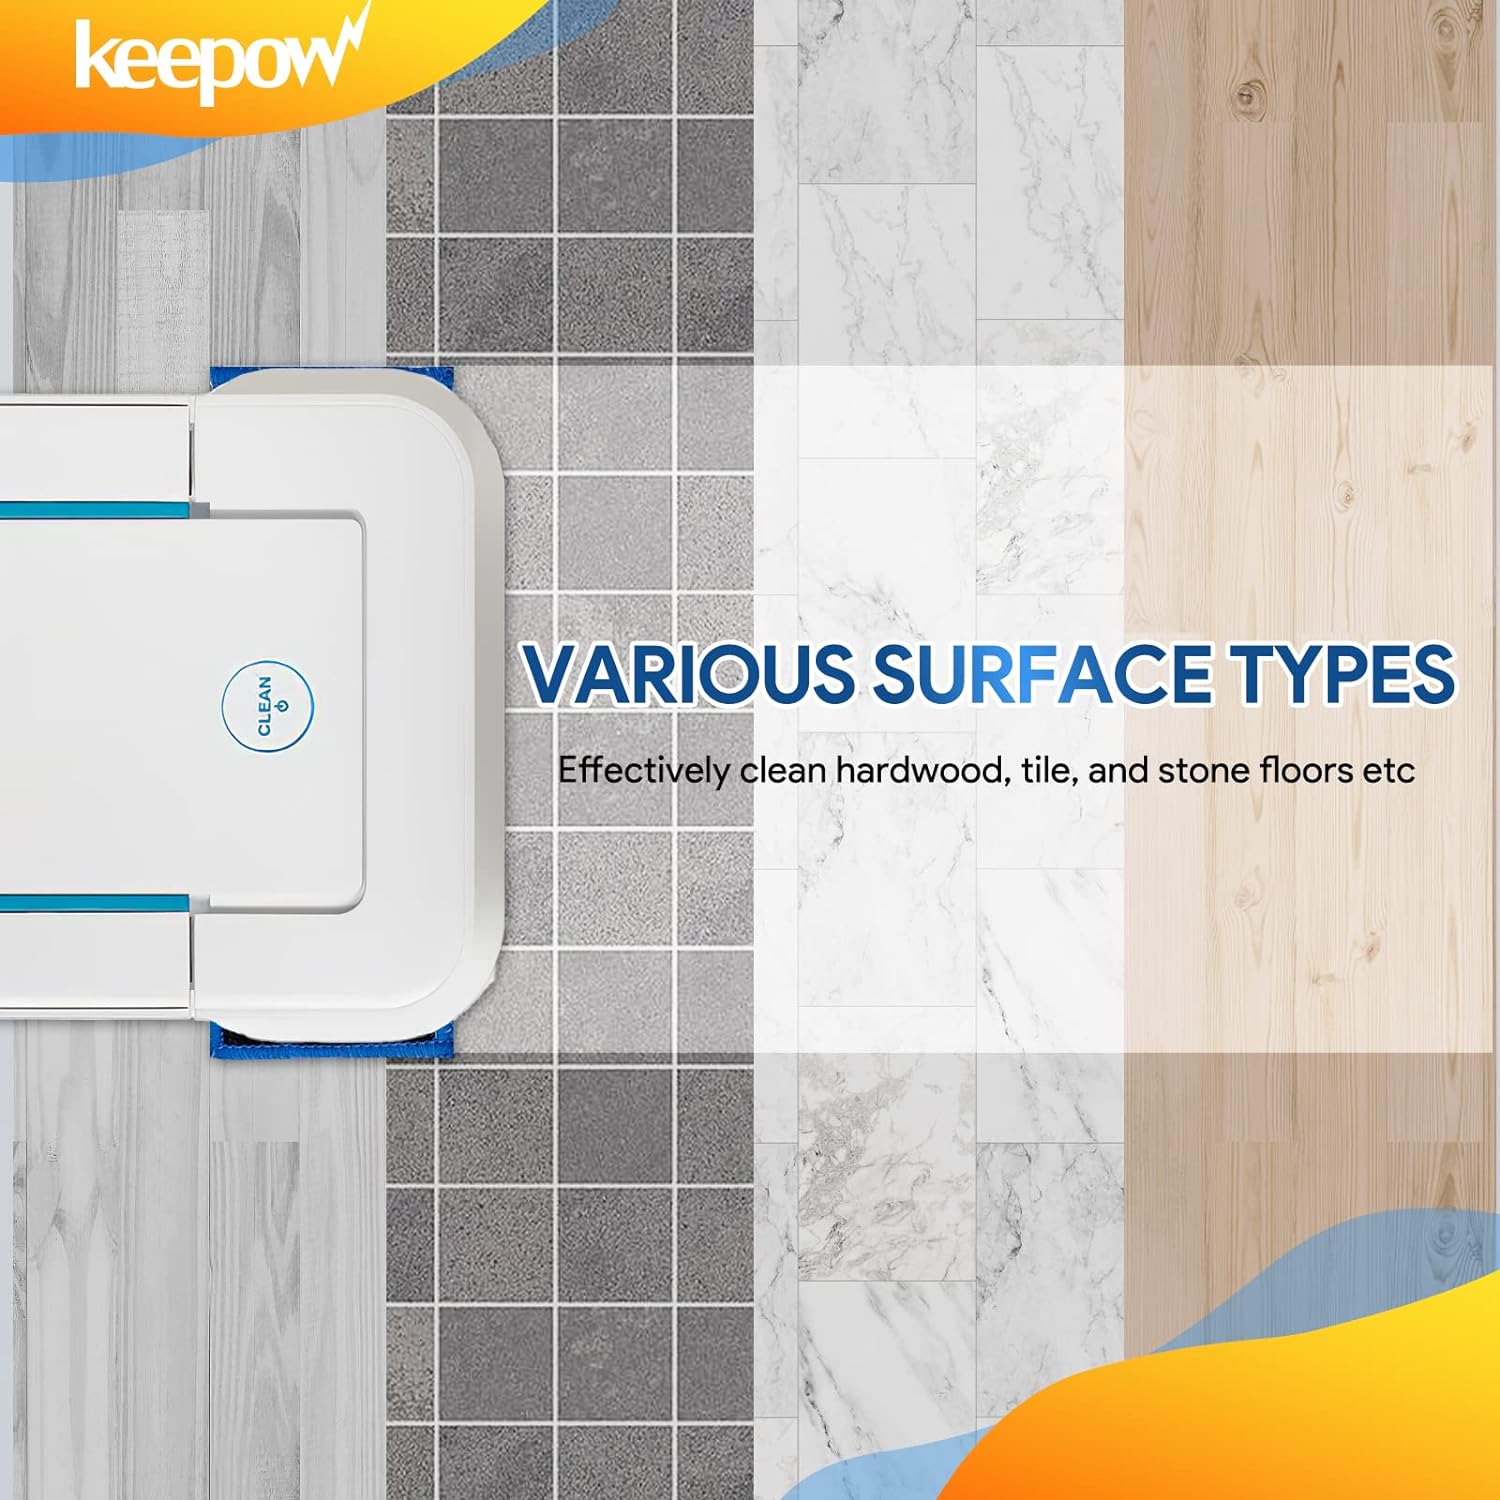 KEEPOW 2707M 2.76*7.1 Inches Mop Pads for Robot Vacuum Cleaner